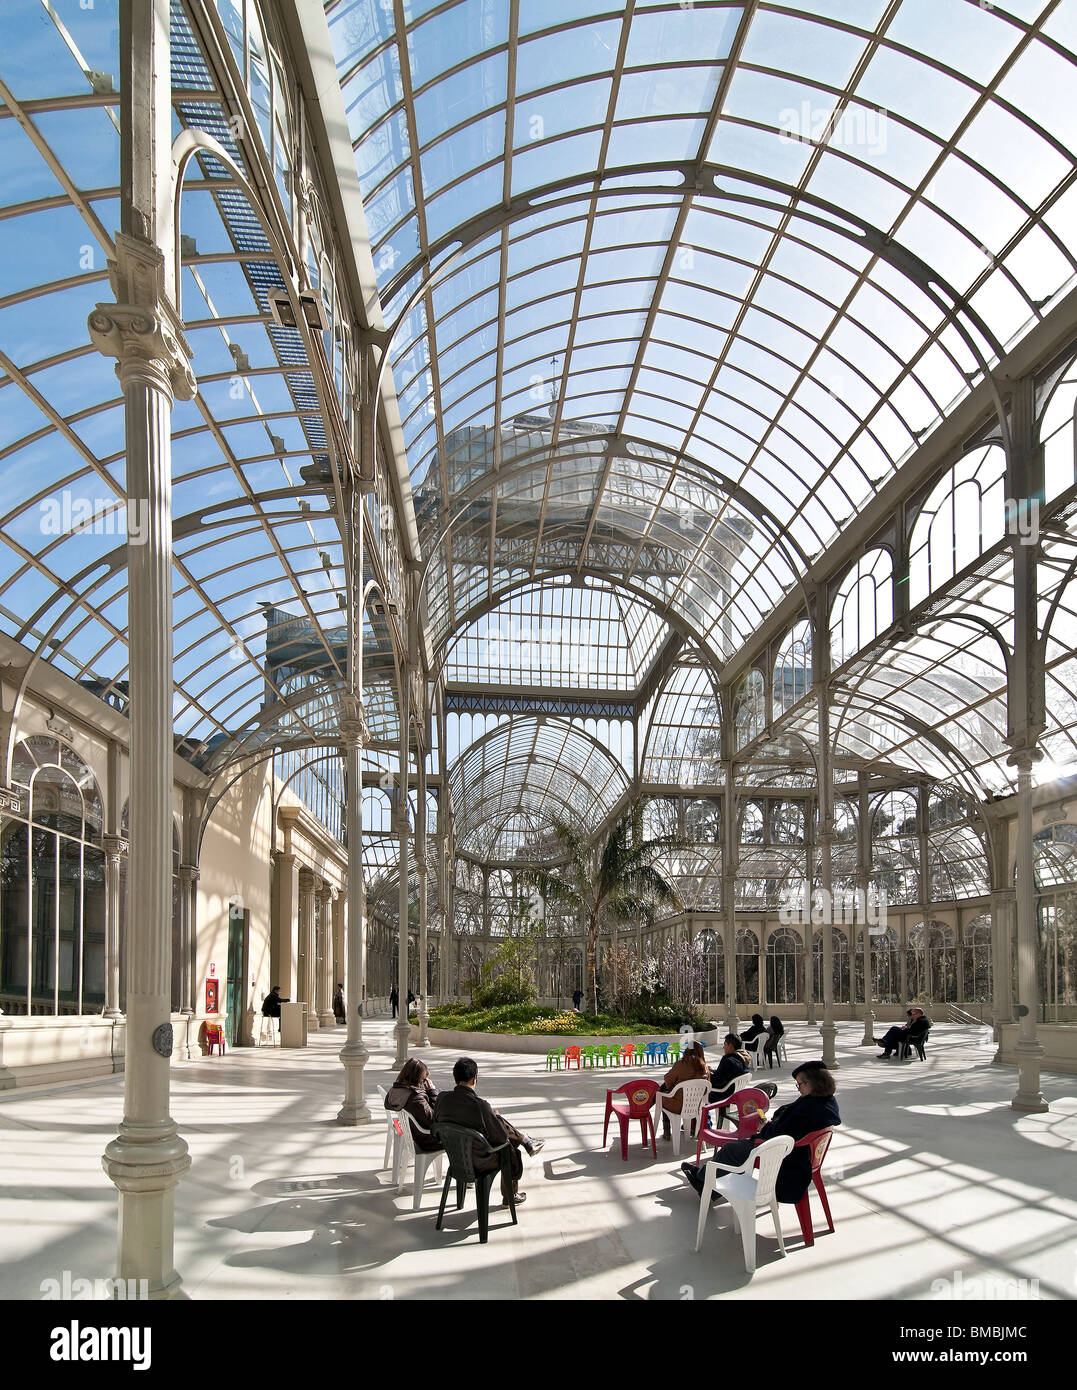 The interior of the Palacio de Cristal, Crystal Palace, in The Retiro Park in the centre of Madrid, Spain Stock Photo